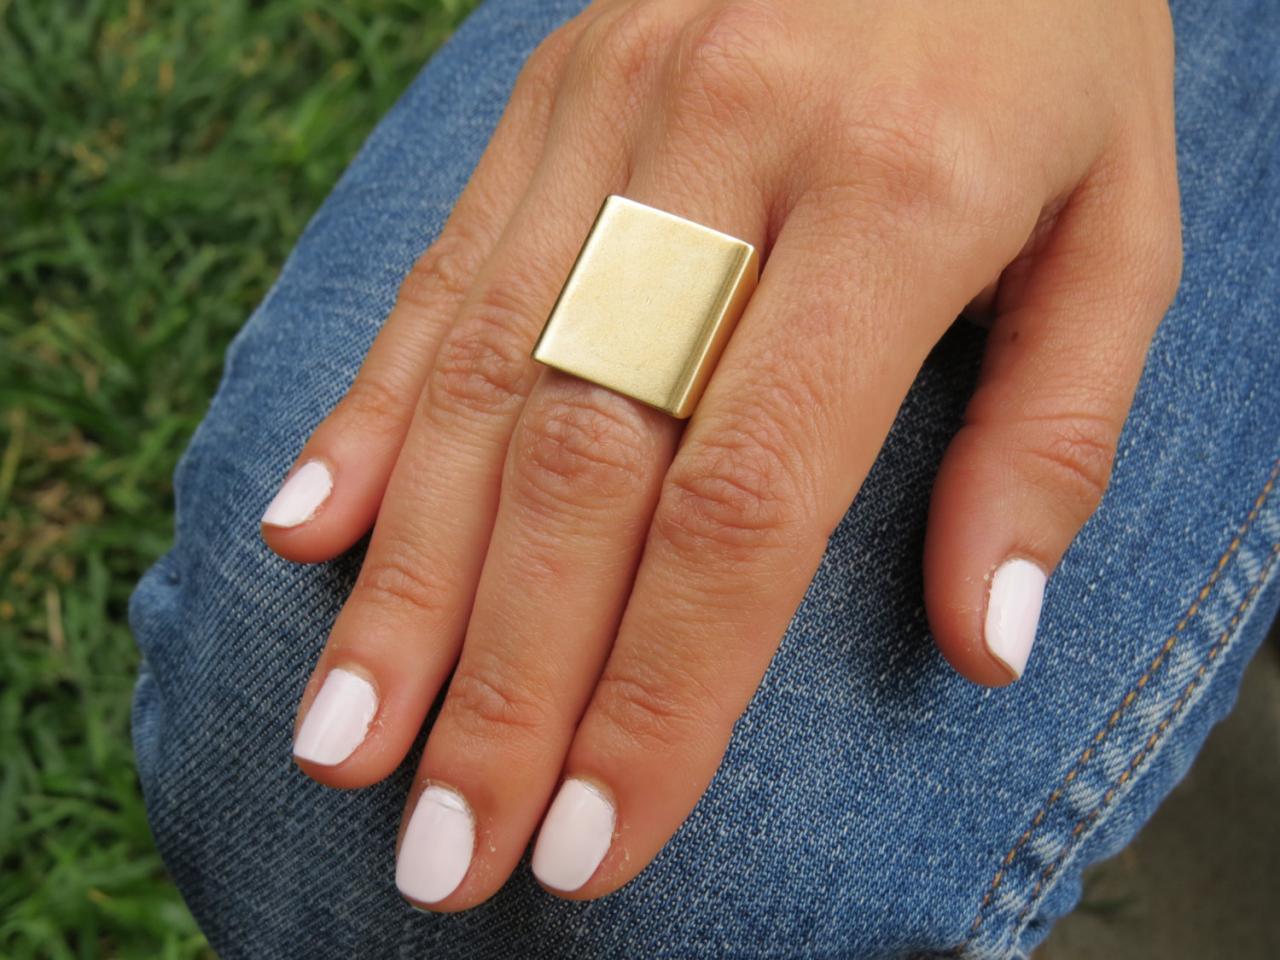 Wide Band Ring - Gold Ring, Adjustable Ring, Simple Big Gold Ring, Statement Ring, Gold Accessories, Square Gold Ring, Gold Jewelry